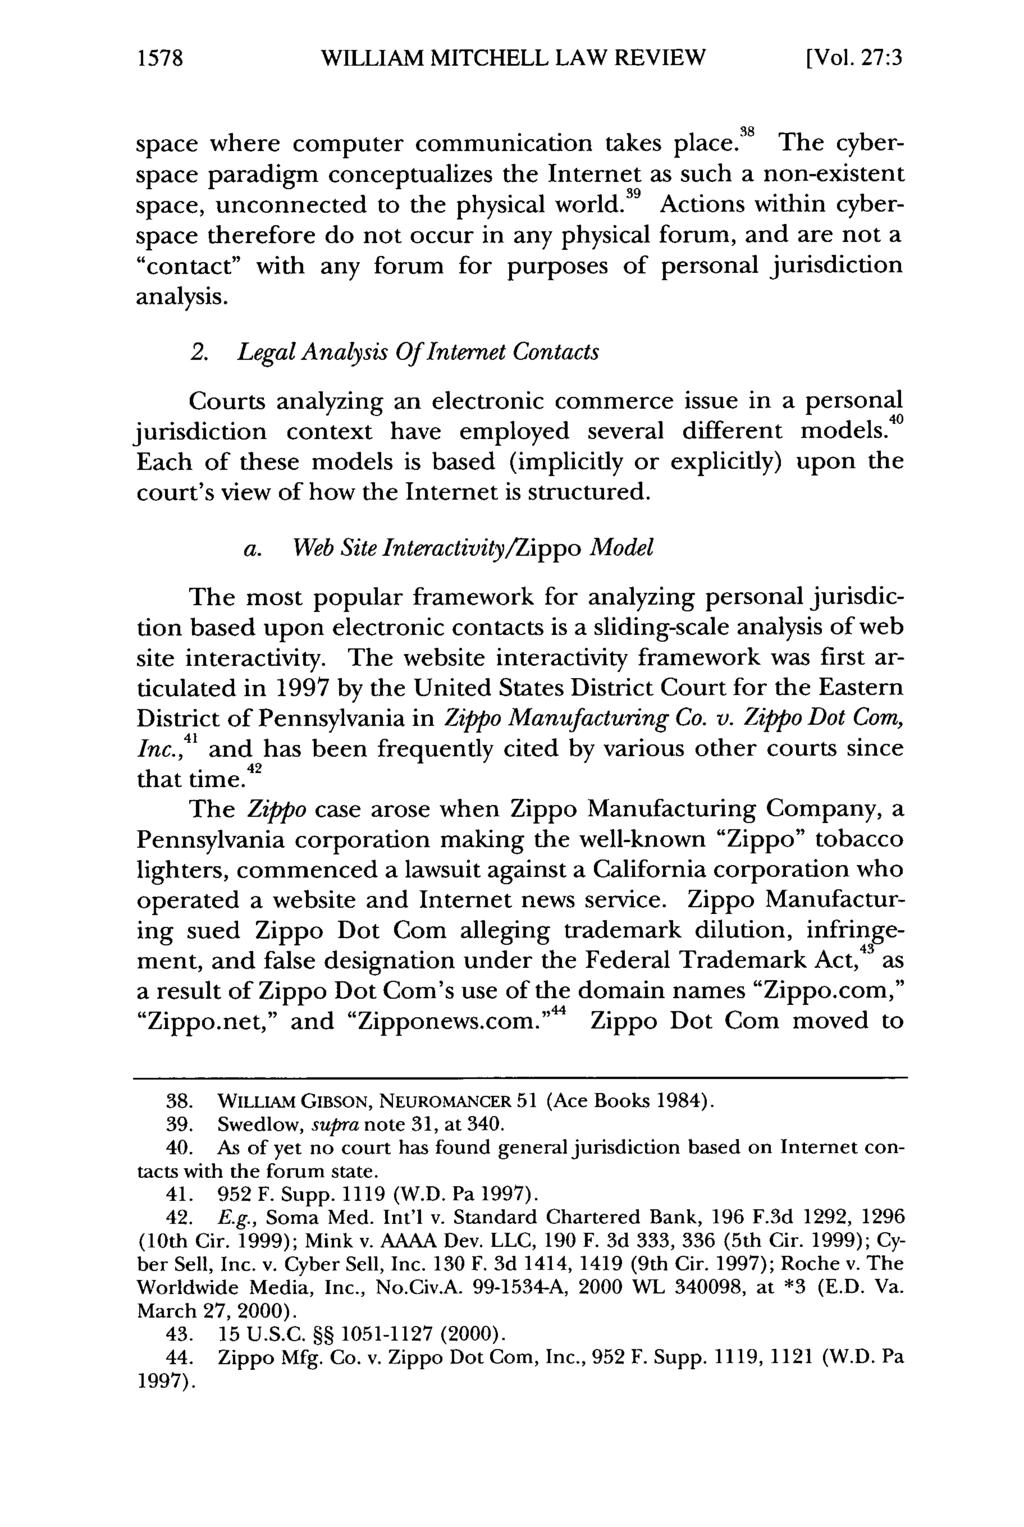 1578 William WILLIAM Mitchell Law MITCHELL Review, Vol. 27, LAW Iss. 3 REVIEW [2001], Art. 13 [Vol.